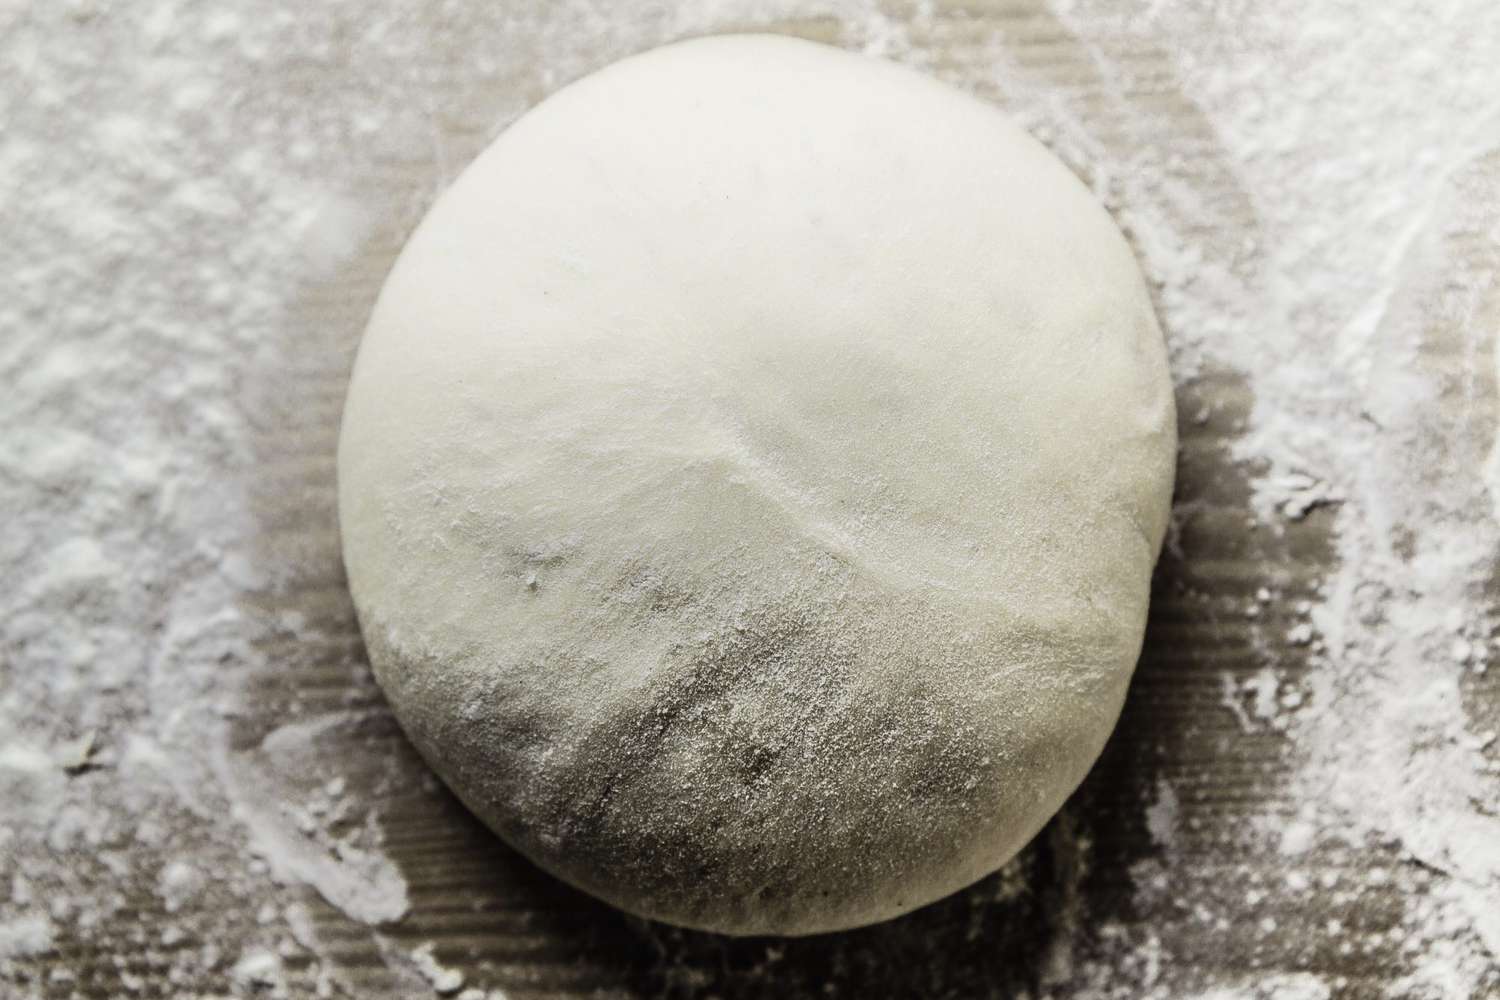 How Long Does Pizza Dough Last In The Freezer